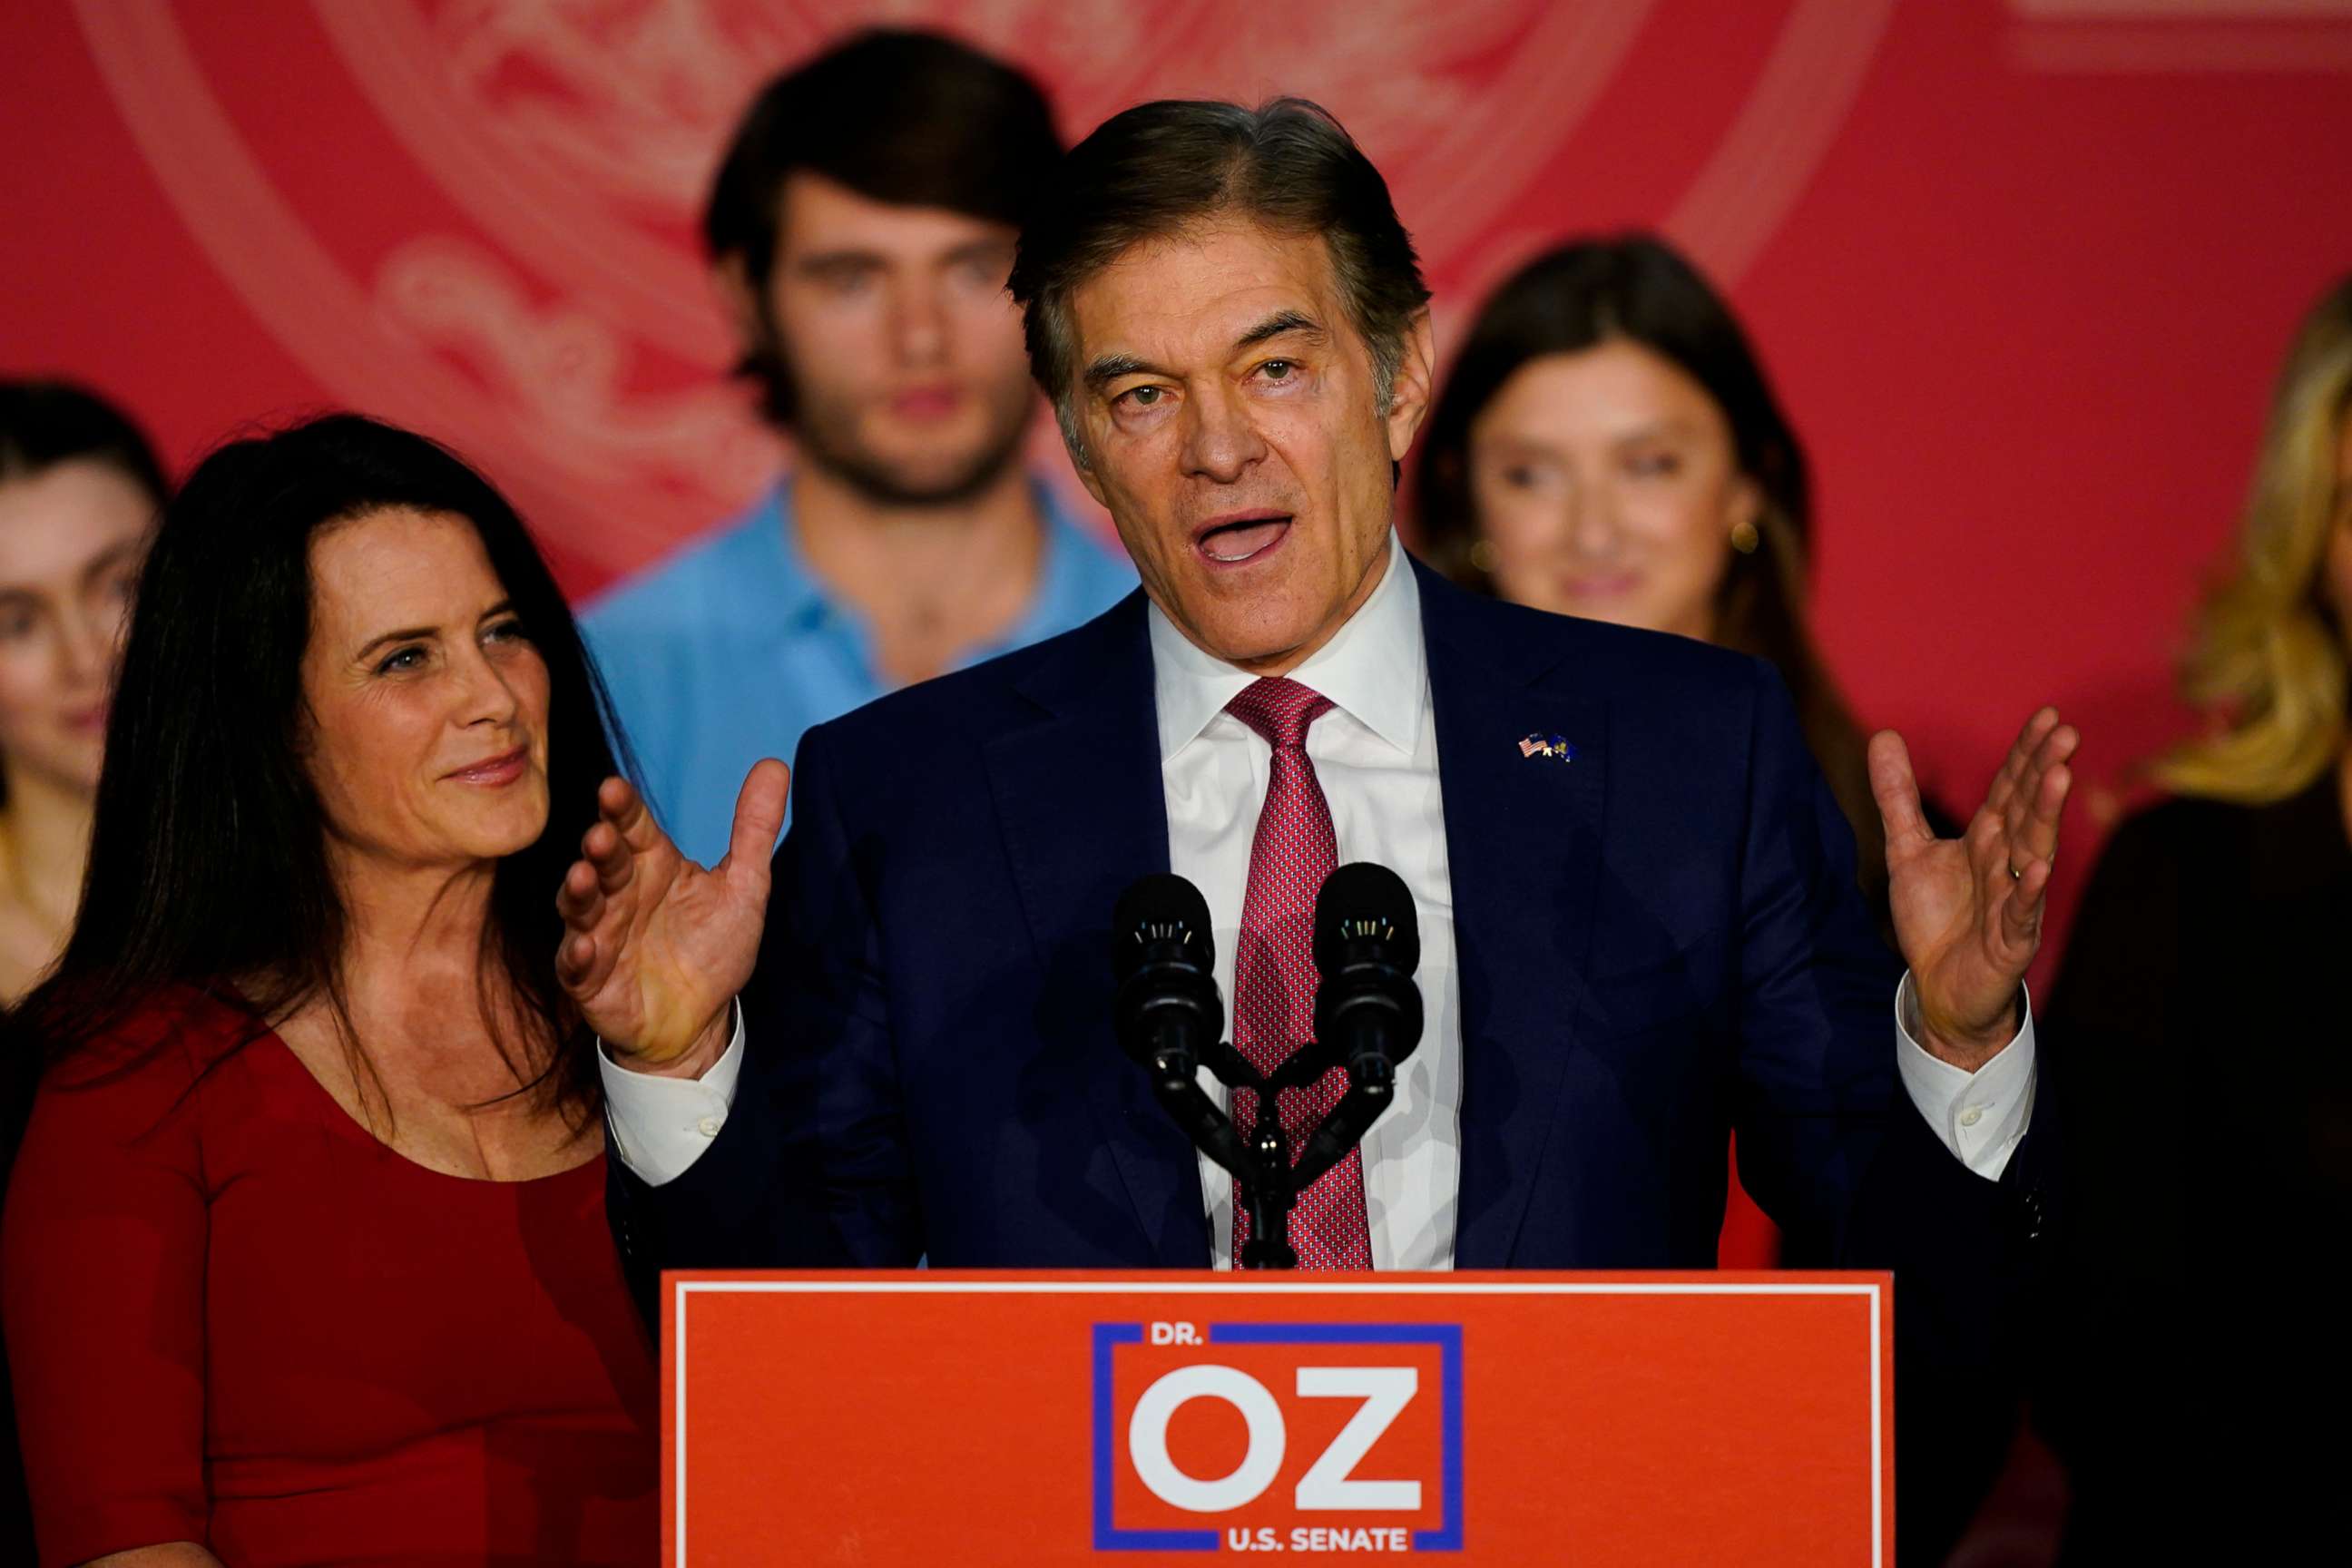 PHOTO: Mehmet Oz, Republican candidate for U.S. Senate in Pennsylvania, speaks to supporters at an election night rally in Newtown, Pa., Nov. 8, 2022.